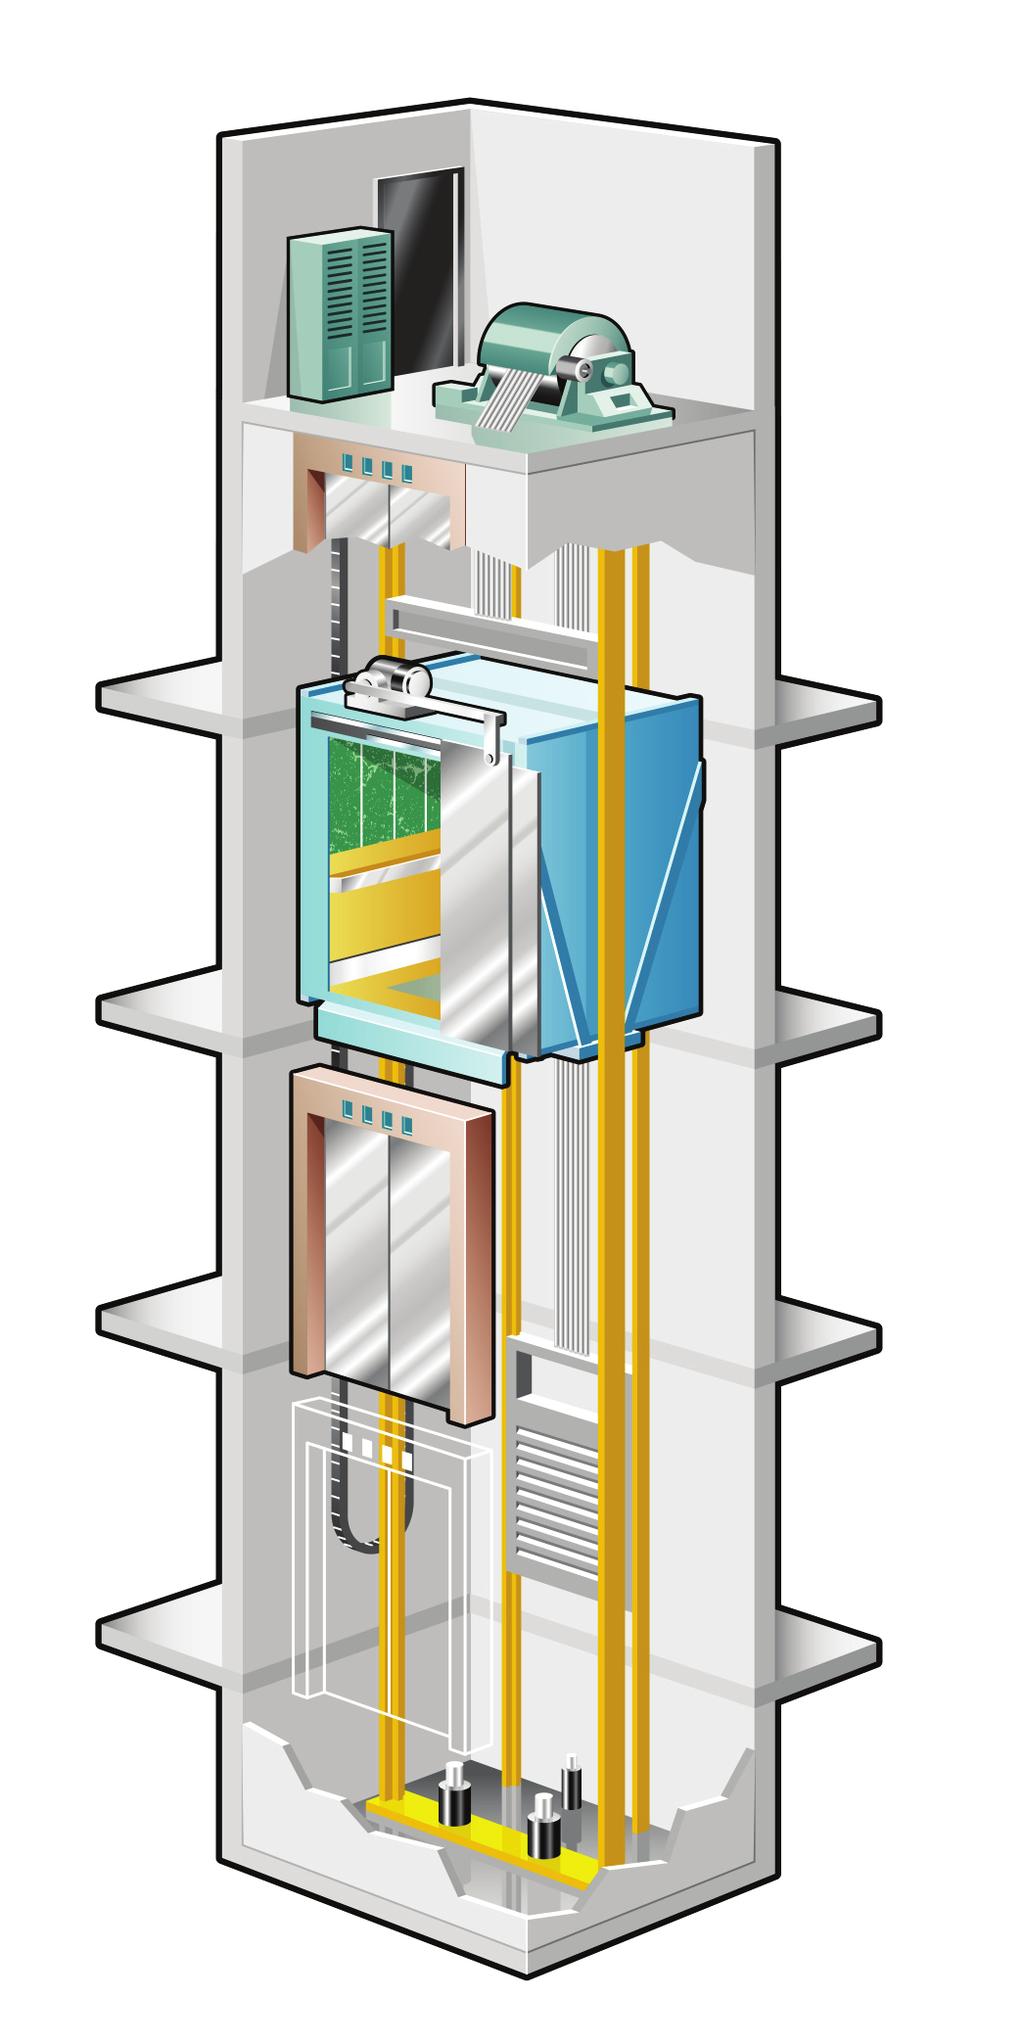 The four primary types of elevator movement mechanisms are: traction (geared or gearless), hydraulic, pneumatic/vacuum and climbing: Geared traction elevators use worm gears to control the mechanical